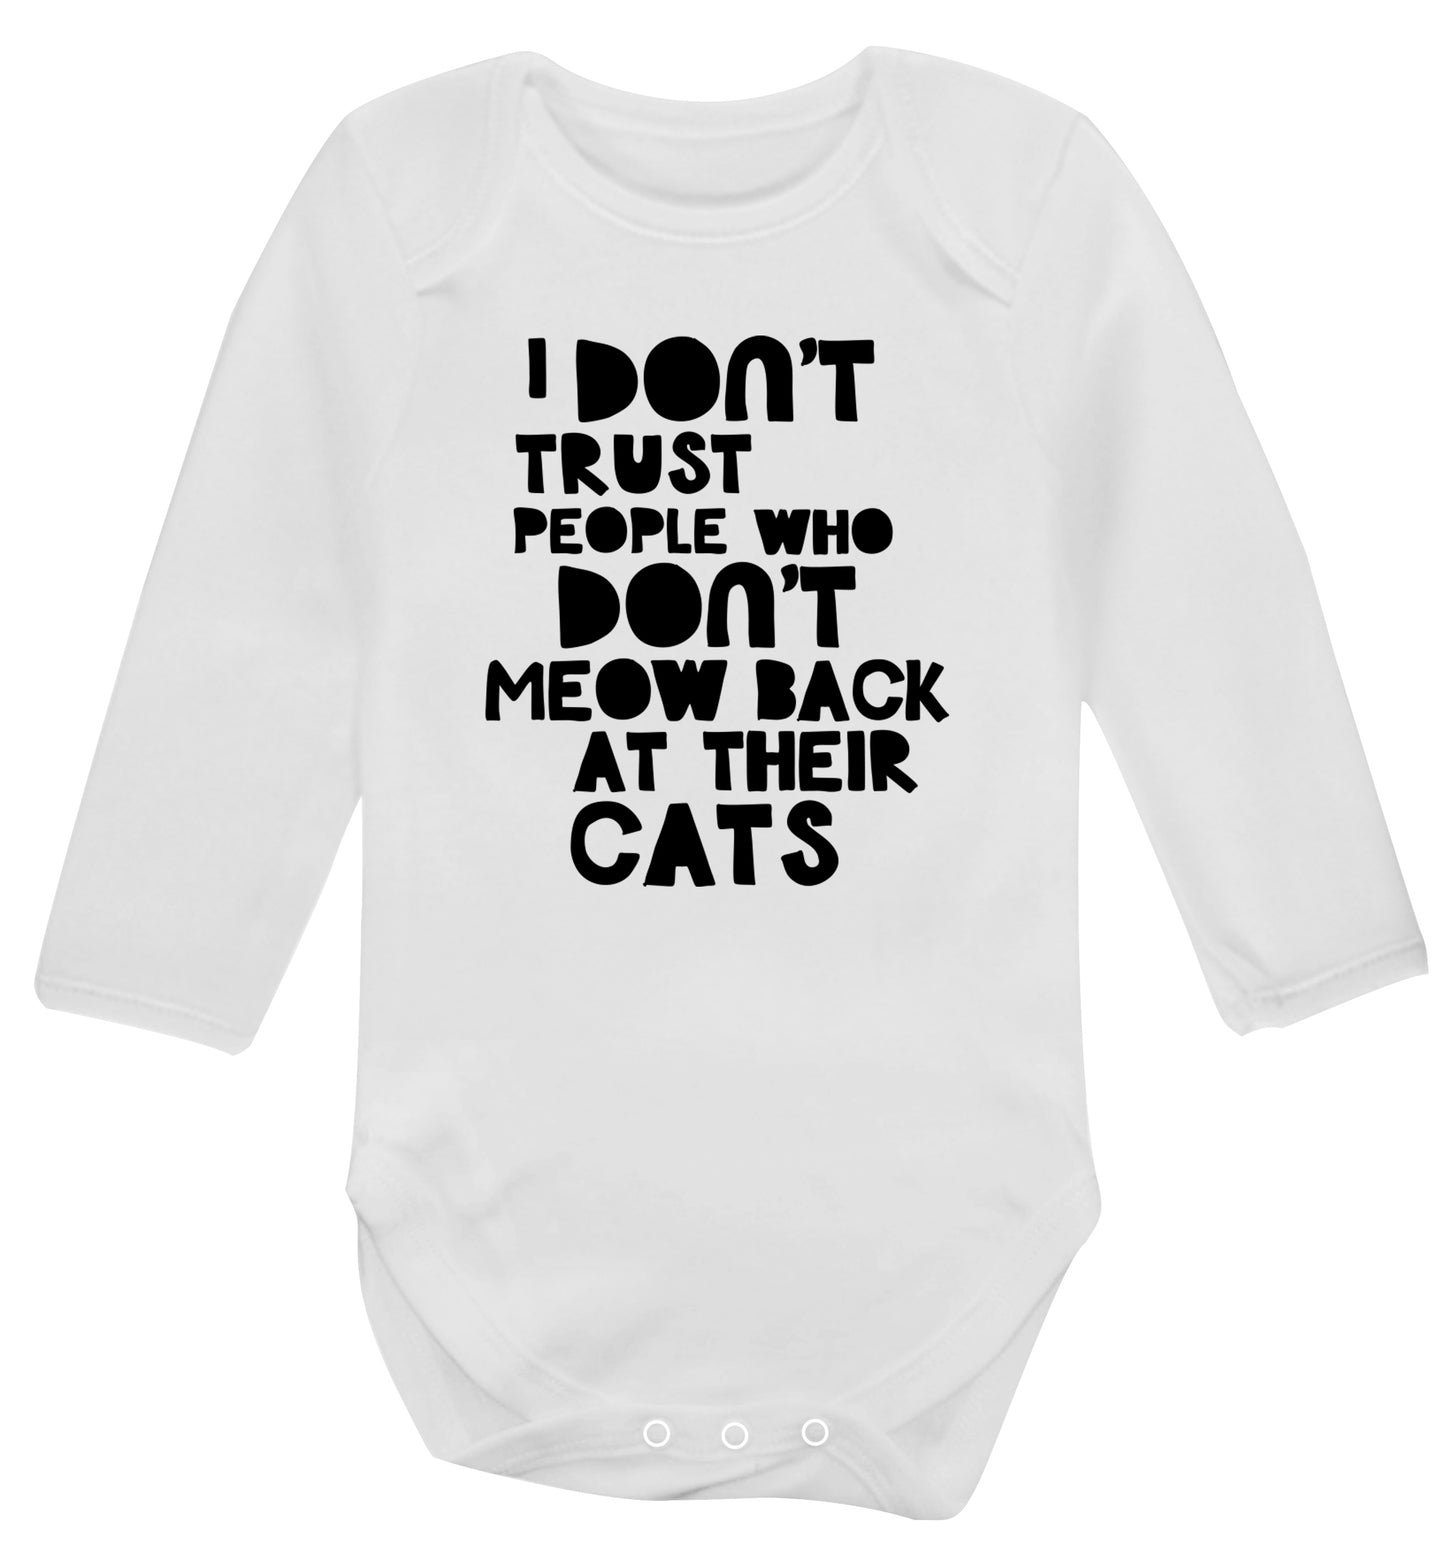 I don't trust people who don't meow back at their cats Baby Vest long sleeved white 6-12 months